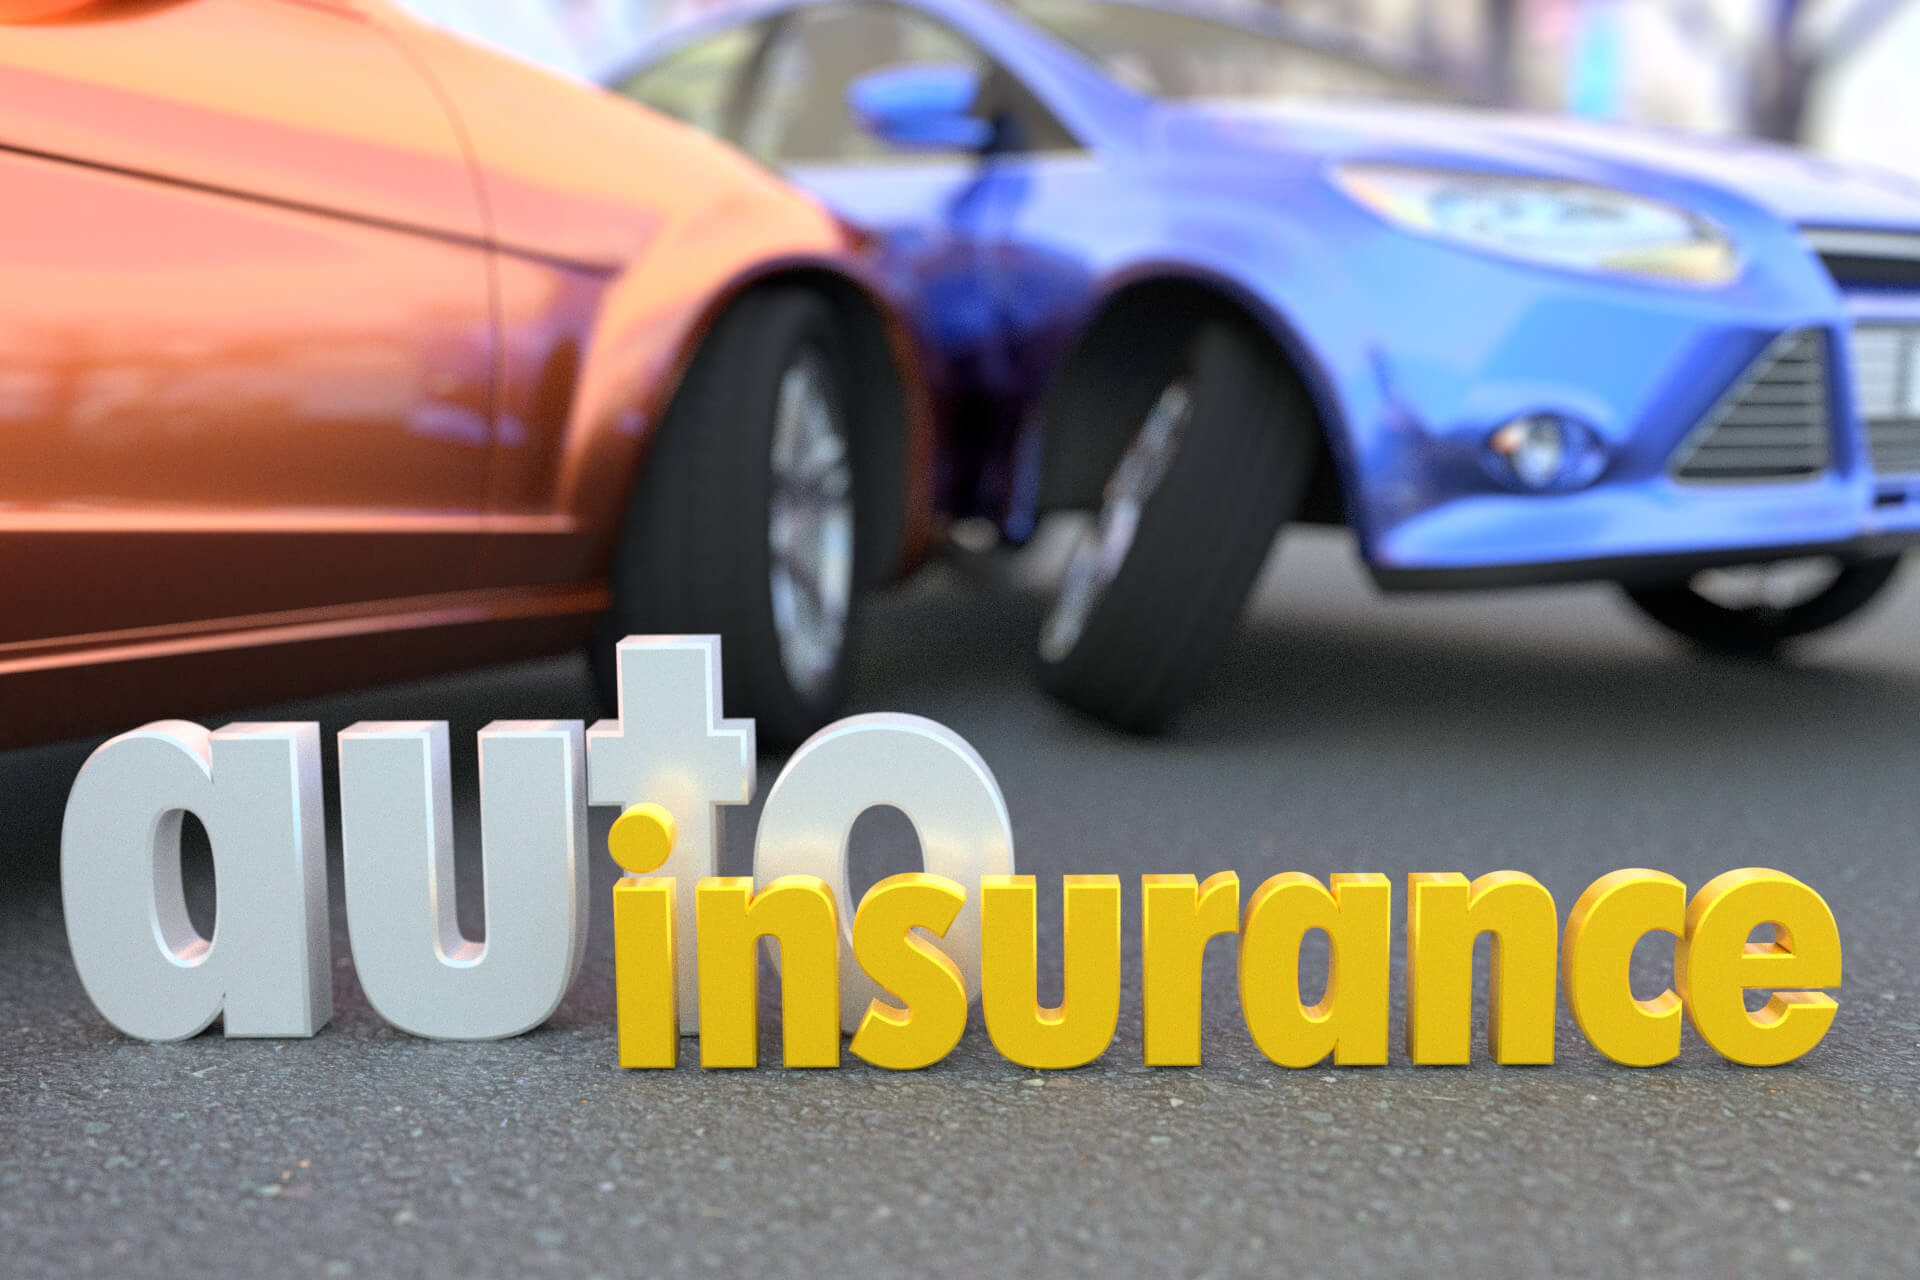 Auto insurance accident claim free image download